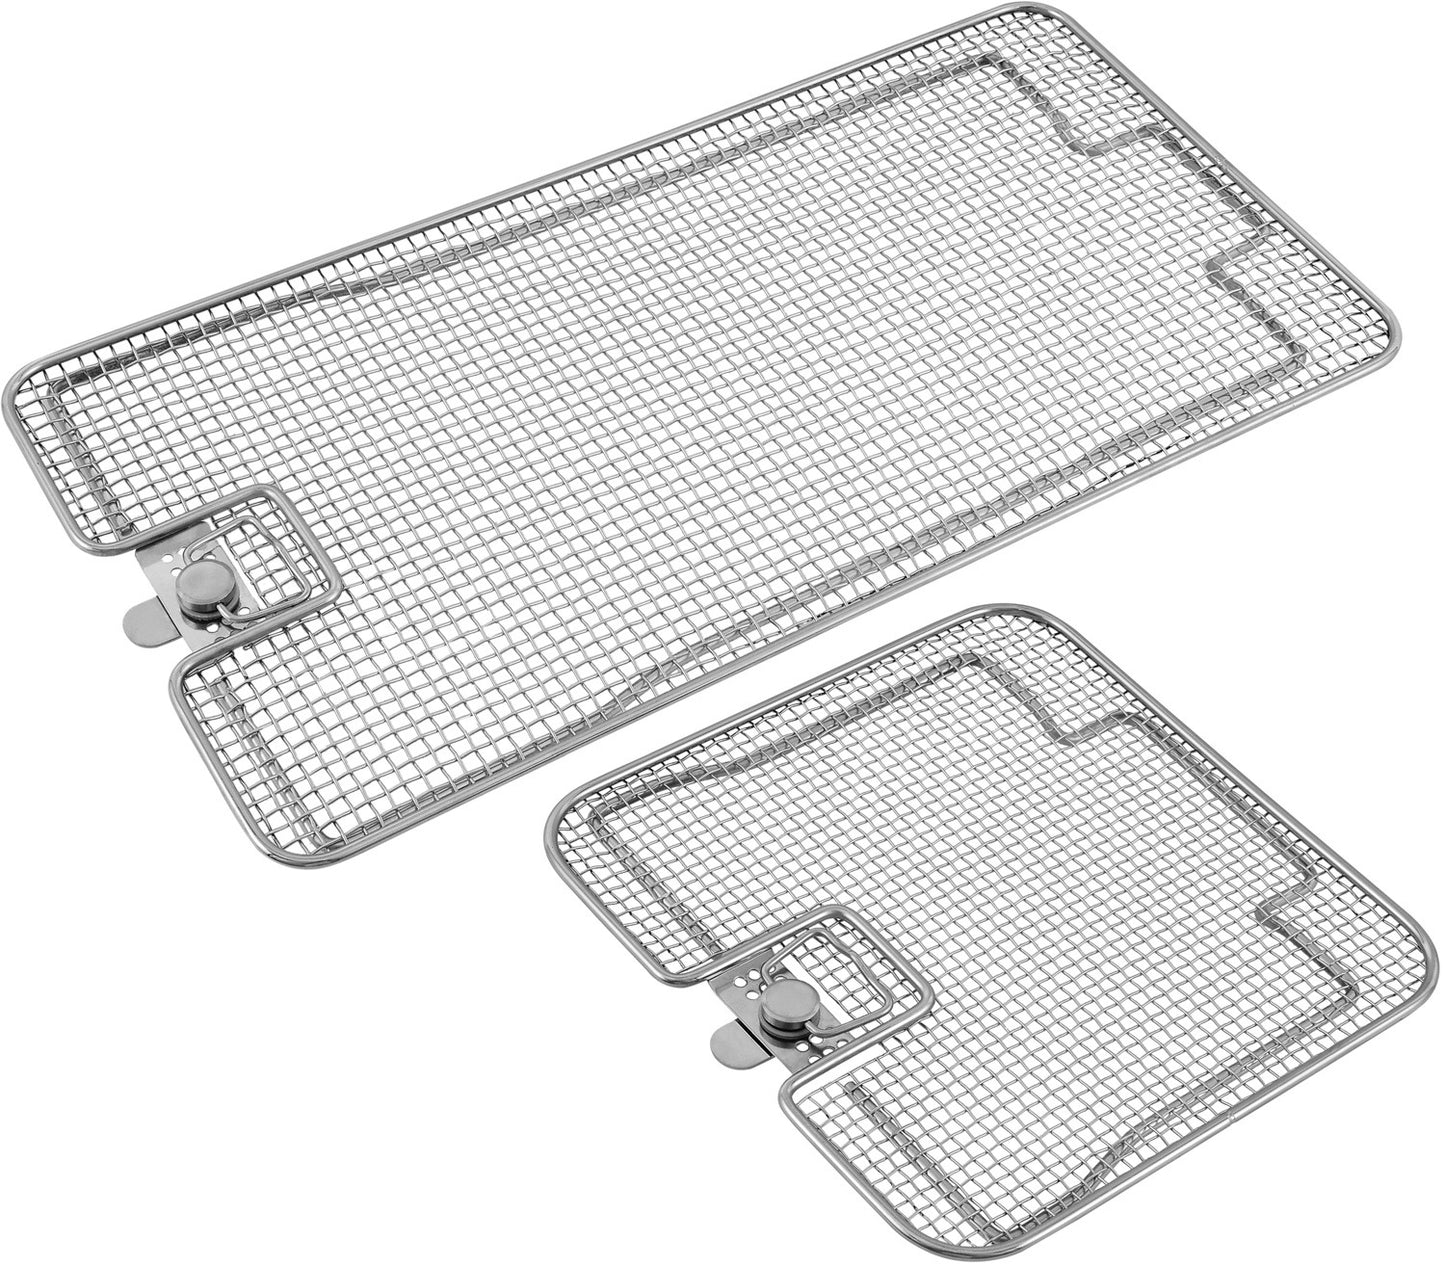 Lids for Perforated Sterilization Baskets with Flat Base, Double Frame-WP-4582